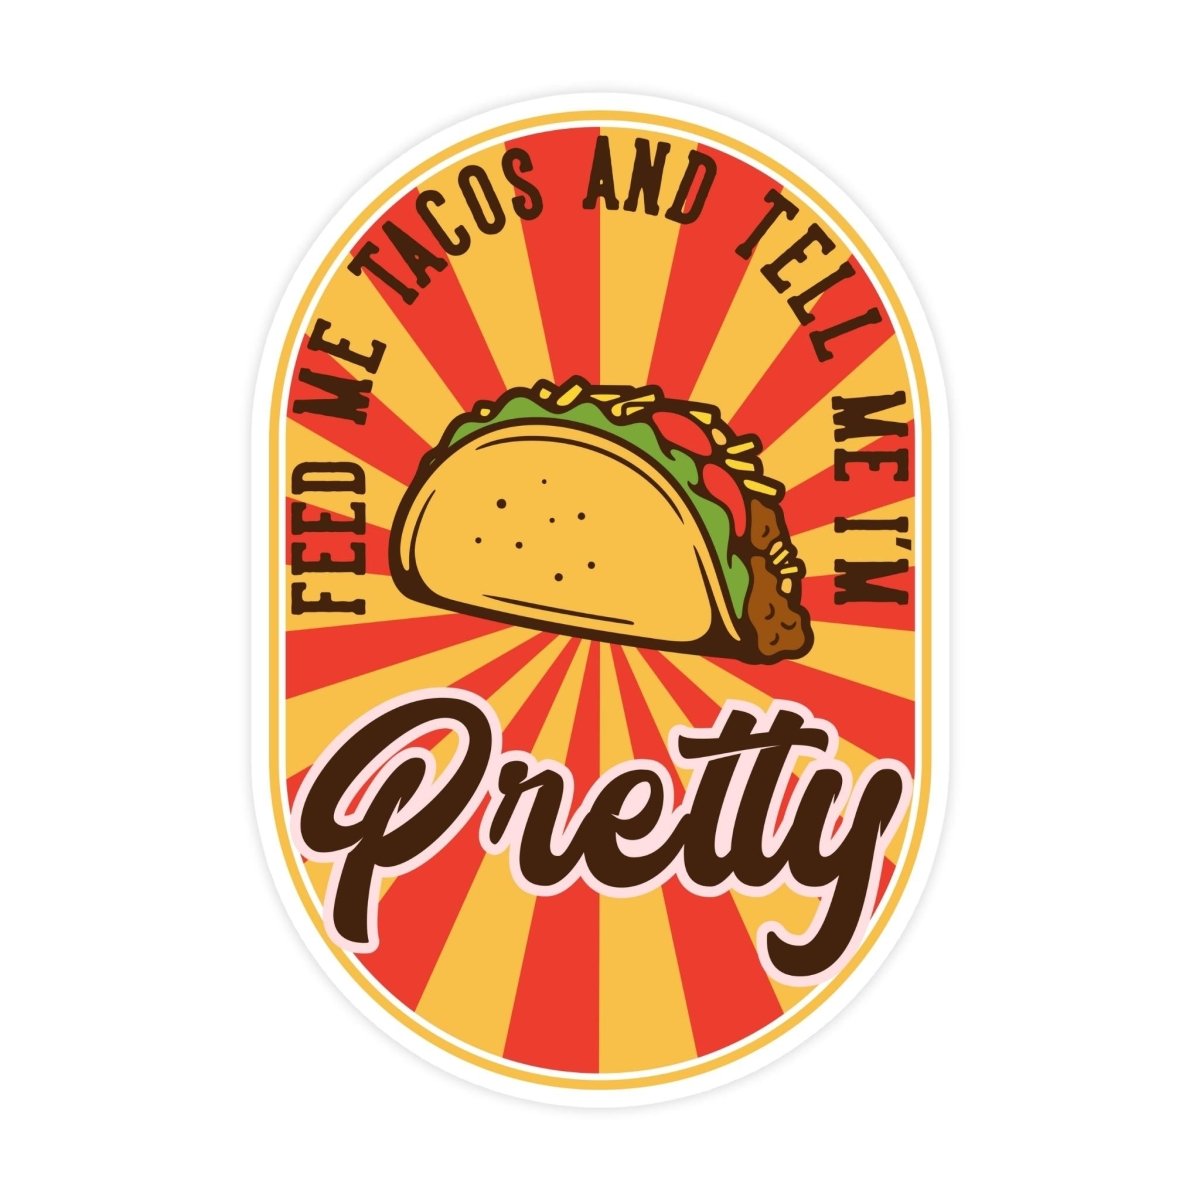 Feed Me Tacos And Tell Me I'm Pretty Sticker - stickerbullFeed Me Tacos And Tell Me I'm Pretty StickerRetail StickerstickerbullstickerbullSage_Feed Me TacosFeed Me Tacos And Tell Me I'm Pretty Sticker